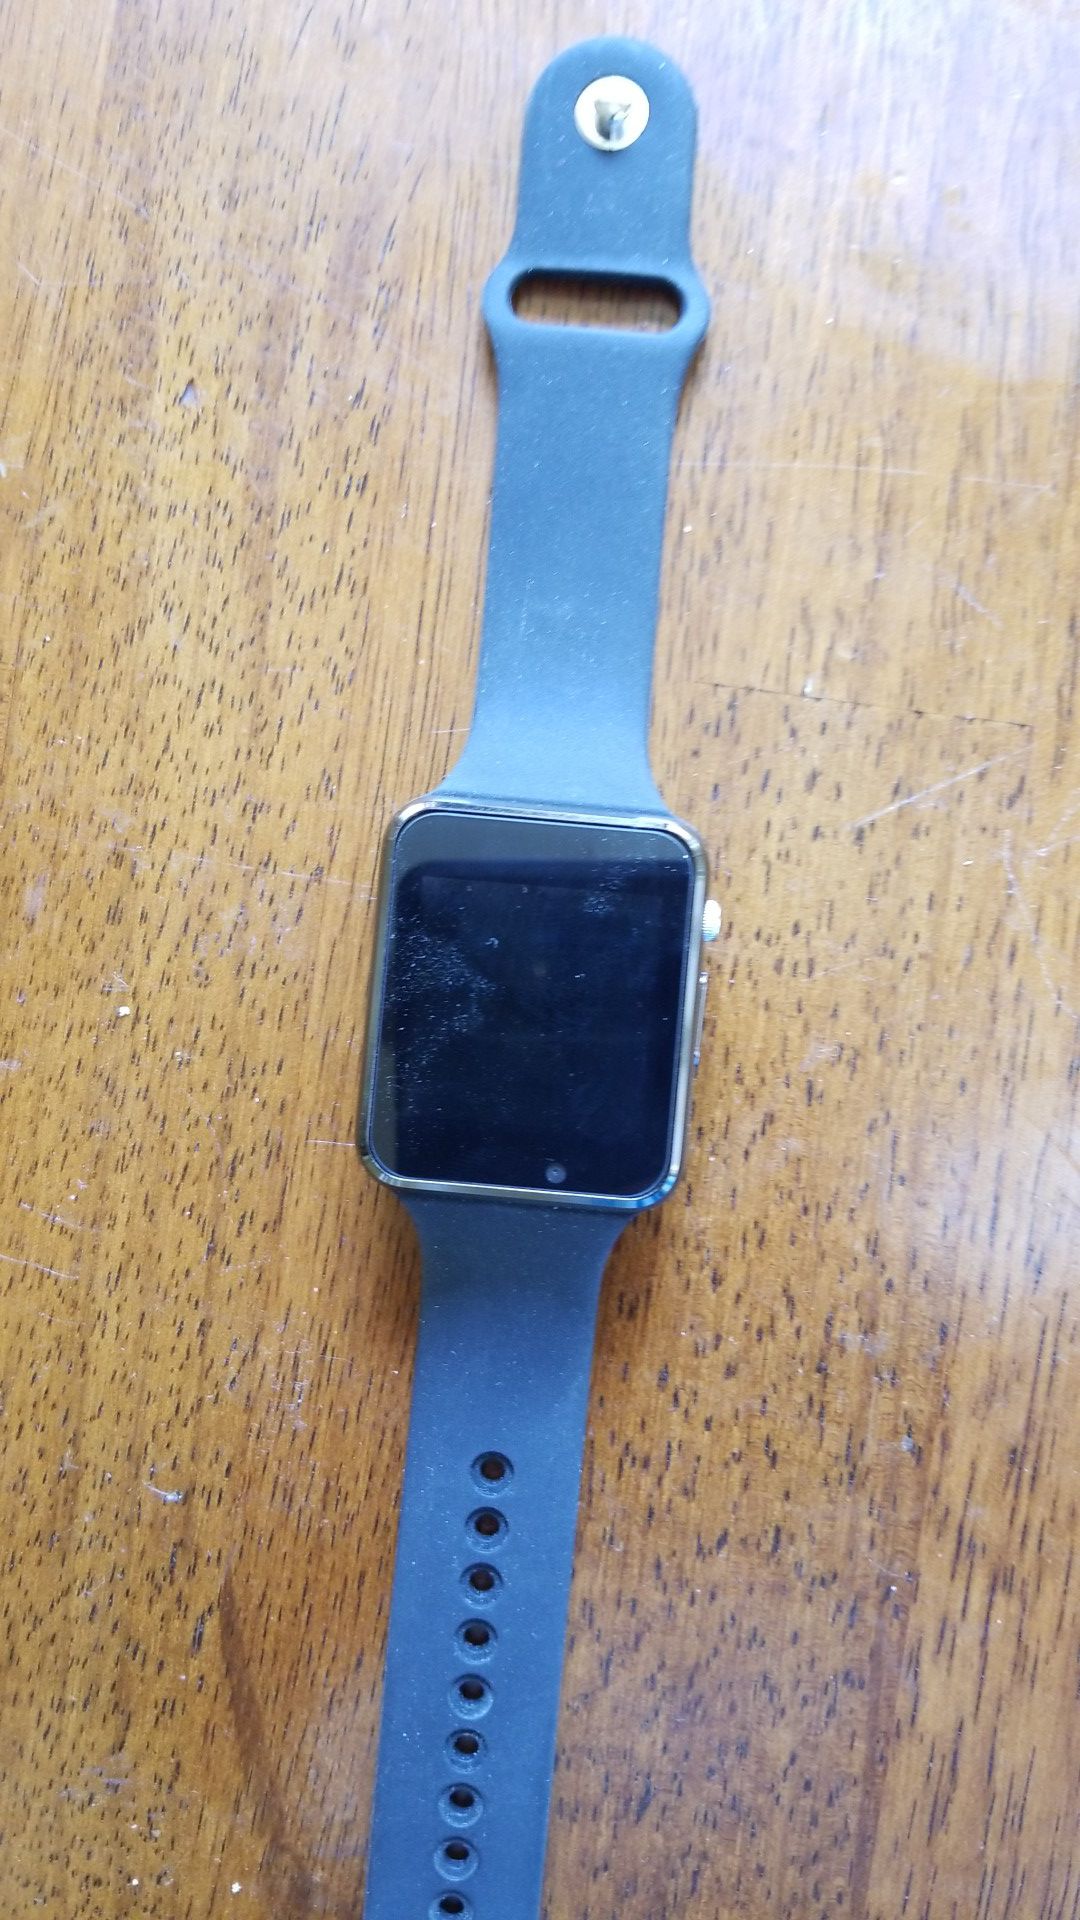 Android/apple smart watch